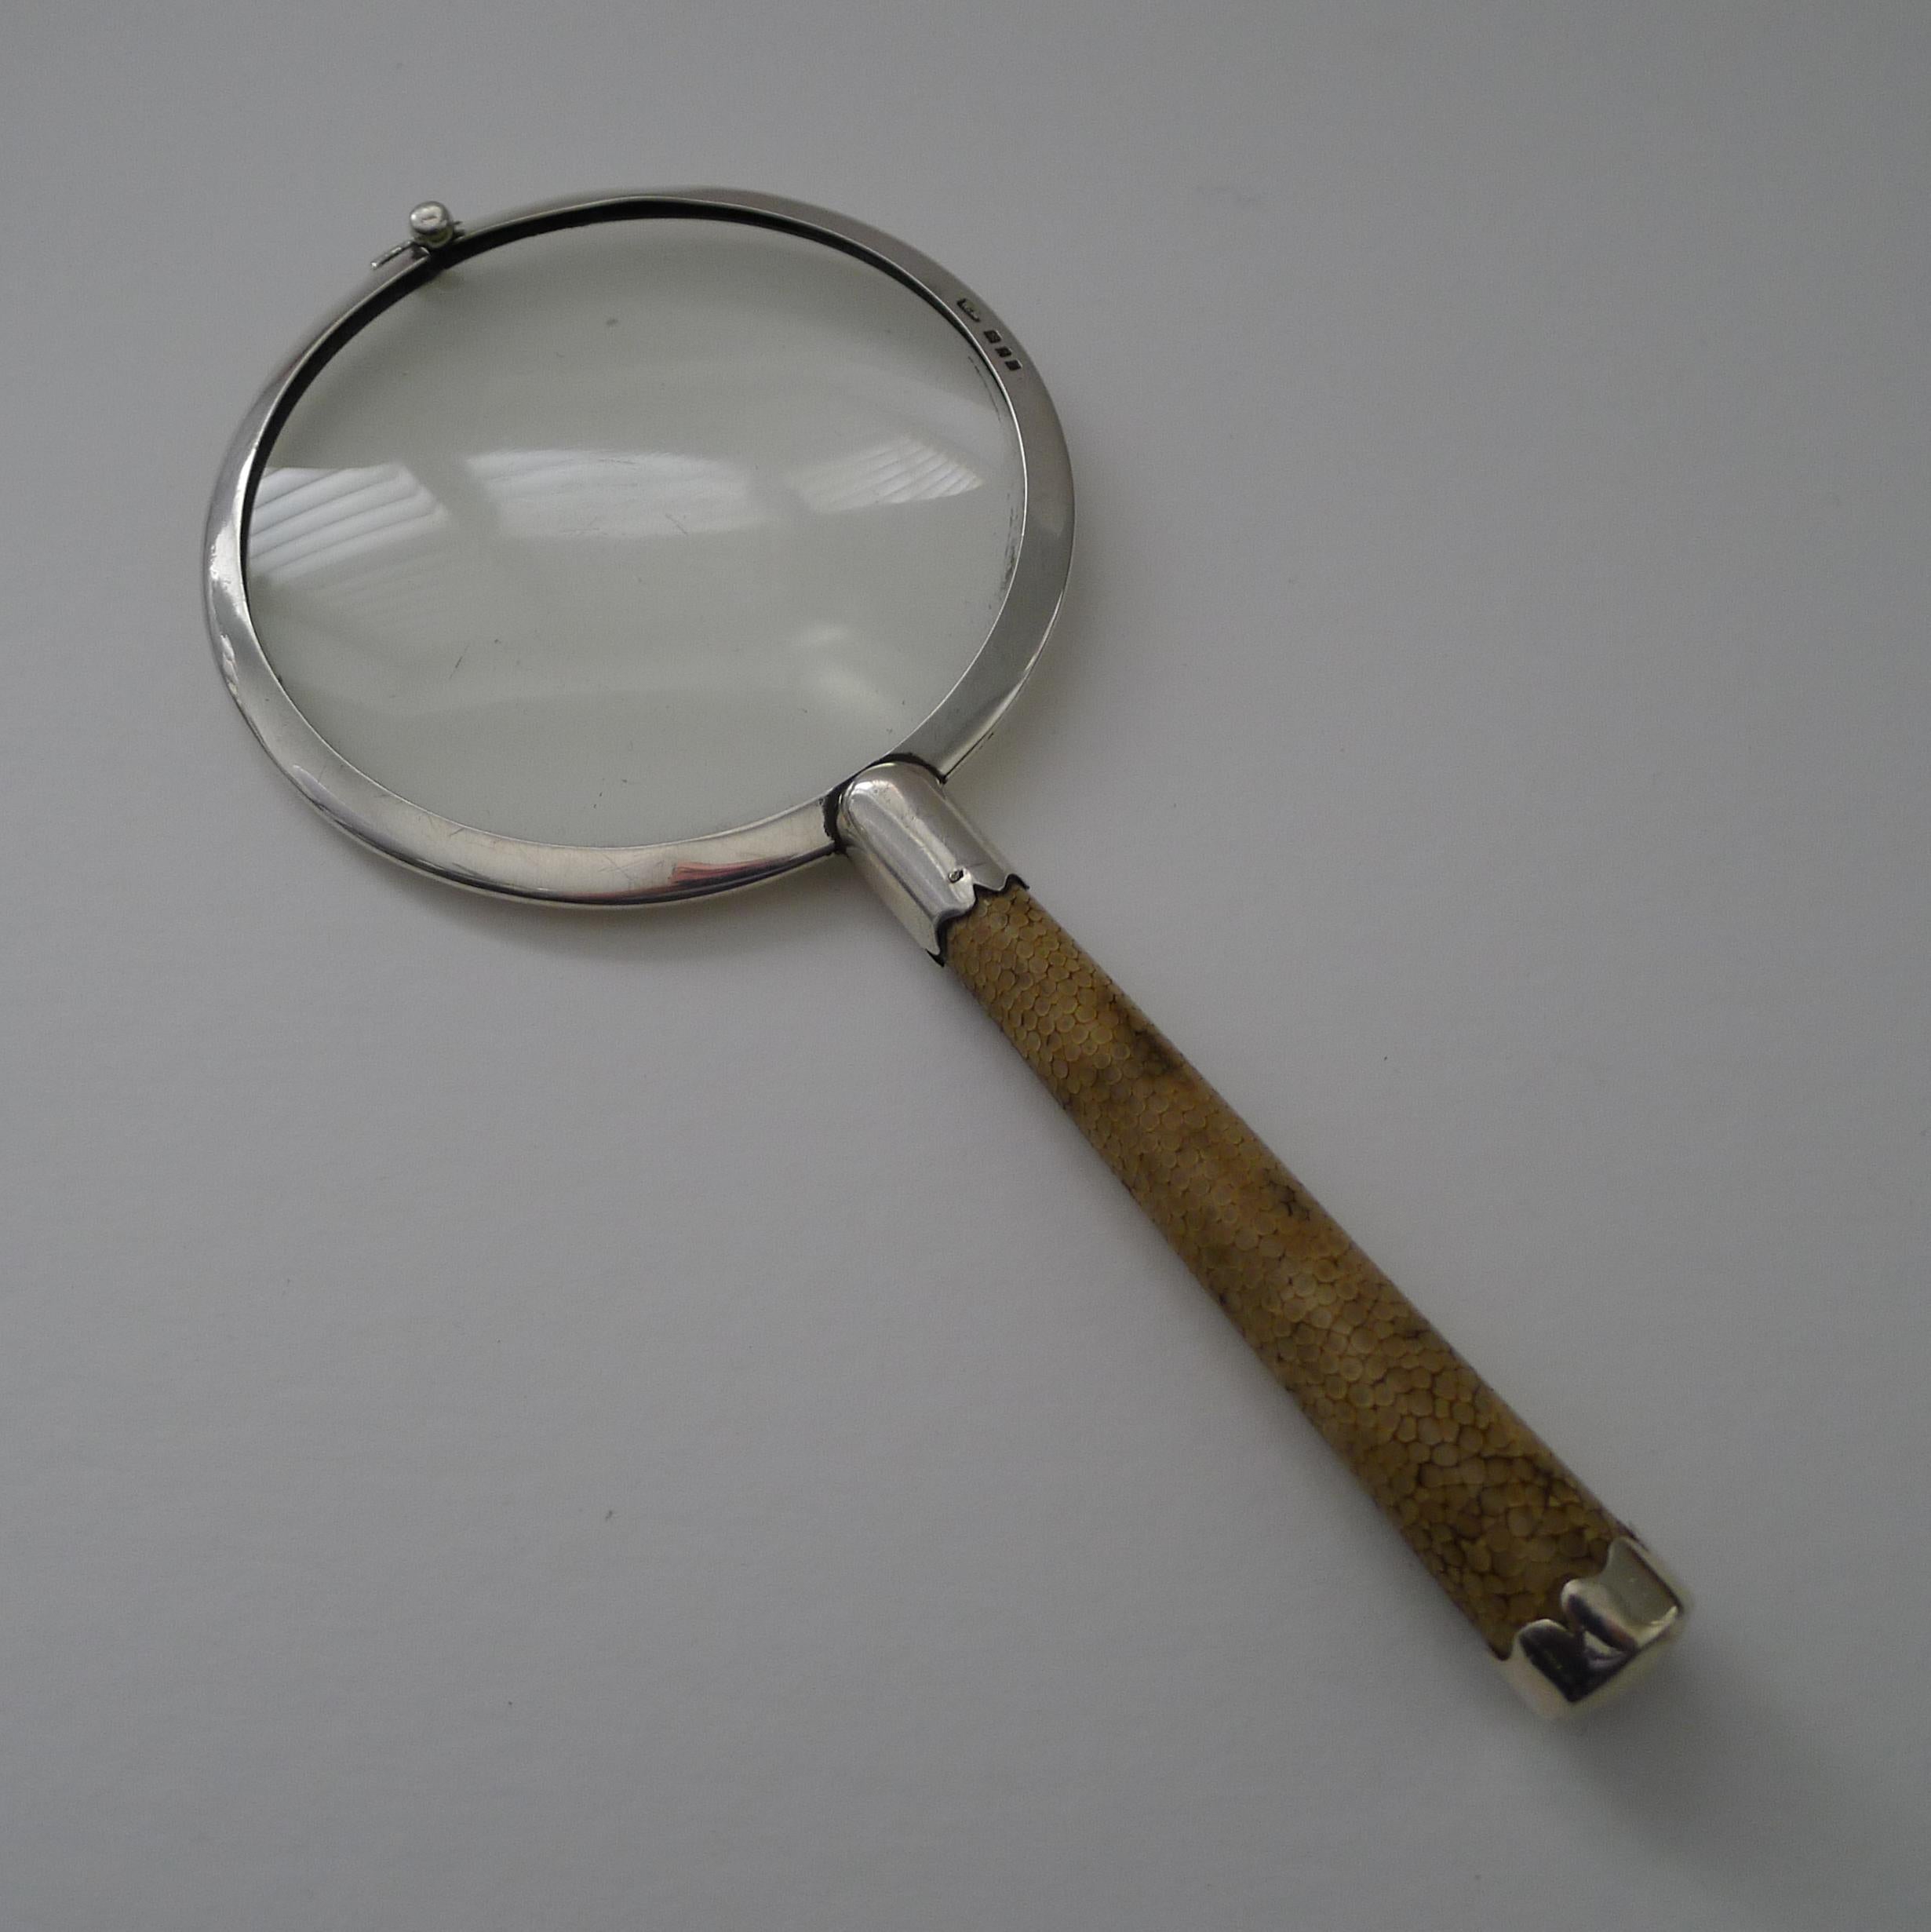 A magnificent magnifying glass by the creme de la creme of English retailer's, Asprey of Bond Street, London.  The silver is fully hallmarked for London 1928 together with the maker's mark W.M.  The silver is also signed 